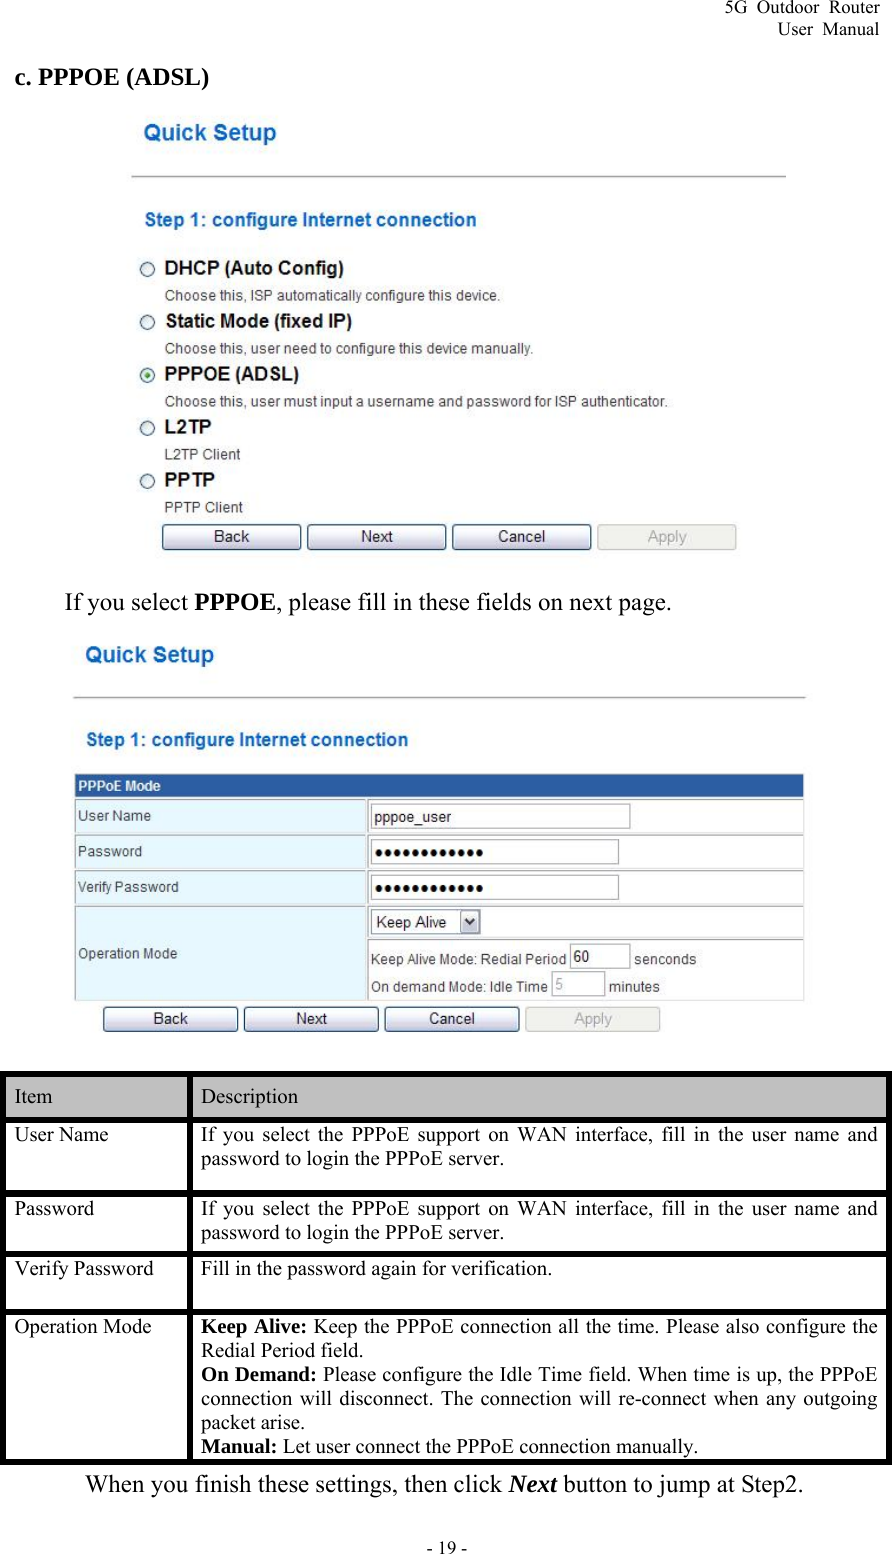 5G Outdoor Router User Manual - 19 - c. PPPOE (ADSL)  If you select PPPOE, please fill in these fields on next page.  Item   Description  User Name  If you select the PPPoE support on WAN interface, fill in the user name and password to login the PPPoE server.   Password  If you select the PPPoE support on WAN interface, fill in the user name and password to login the PPPoE server. Verify Password    Fill in the password again for verification. Operation Mode  Keep Alive: Keep the PPPoE connection all the time. Please also configure the Redial Period field. On Demand: Please configure the Idle Time field. When time is up, the PPPoE connection will disconnect. The connection will re-connect when any outgoing packet arise. Manual: Let user connect the PPPoE connection manually.   When you finish these settings, then click Next button to jump at Step2. 